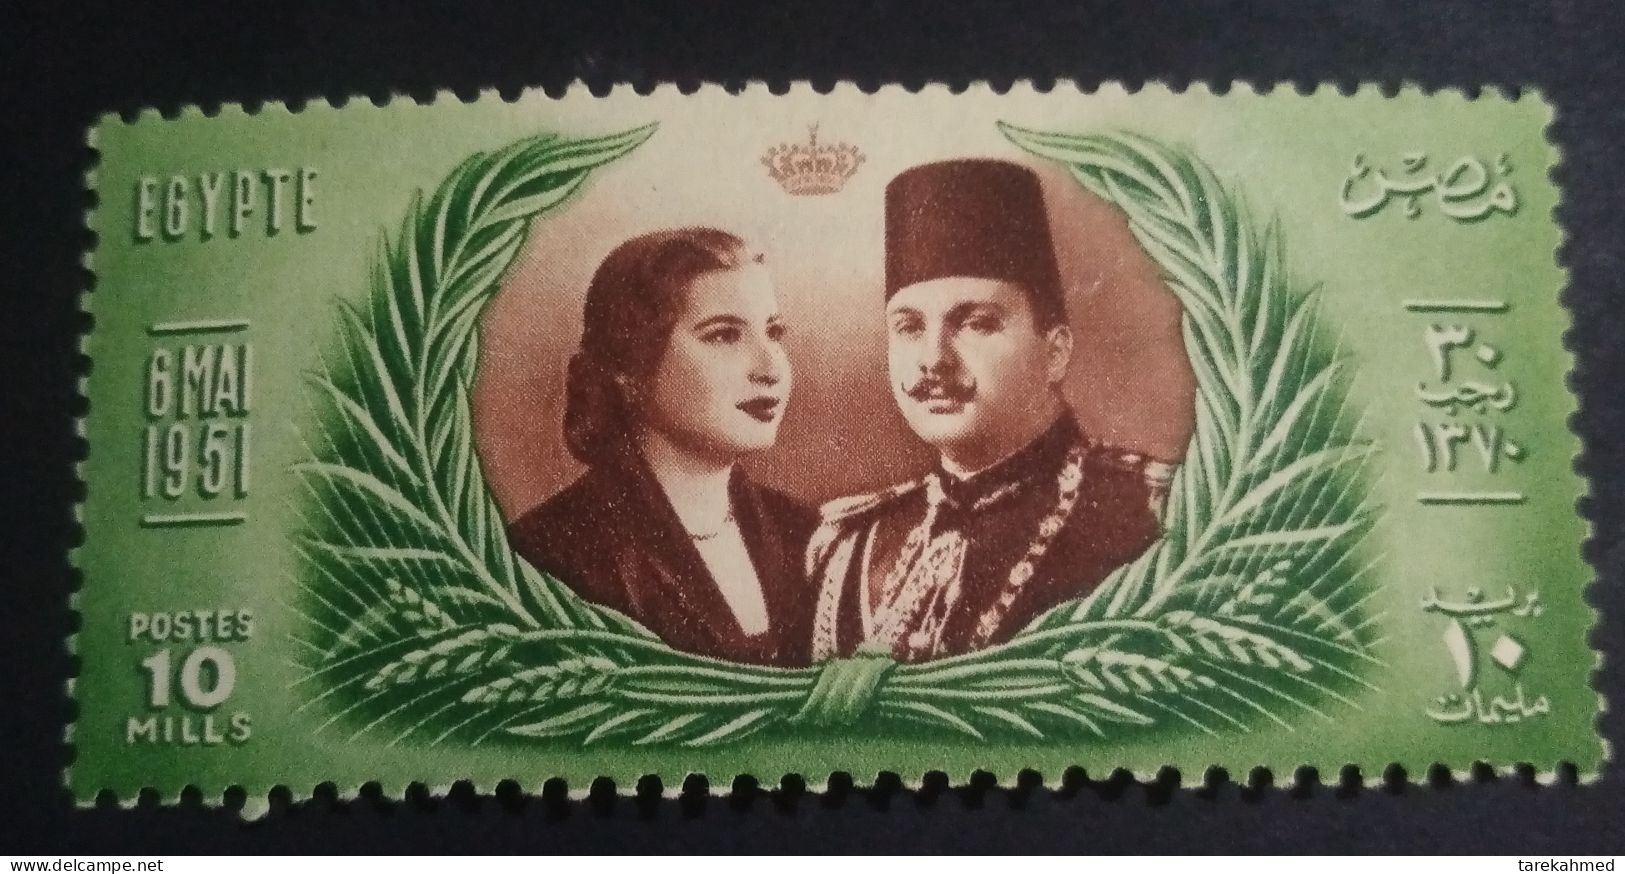 EGYPT 1951 , KING FAROUK & QUEEN NARRIMAN . ROYAL WEDDING , MNH , Watermark Crown And Letter Noon ن ، Original Gum - Unused Stamps